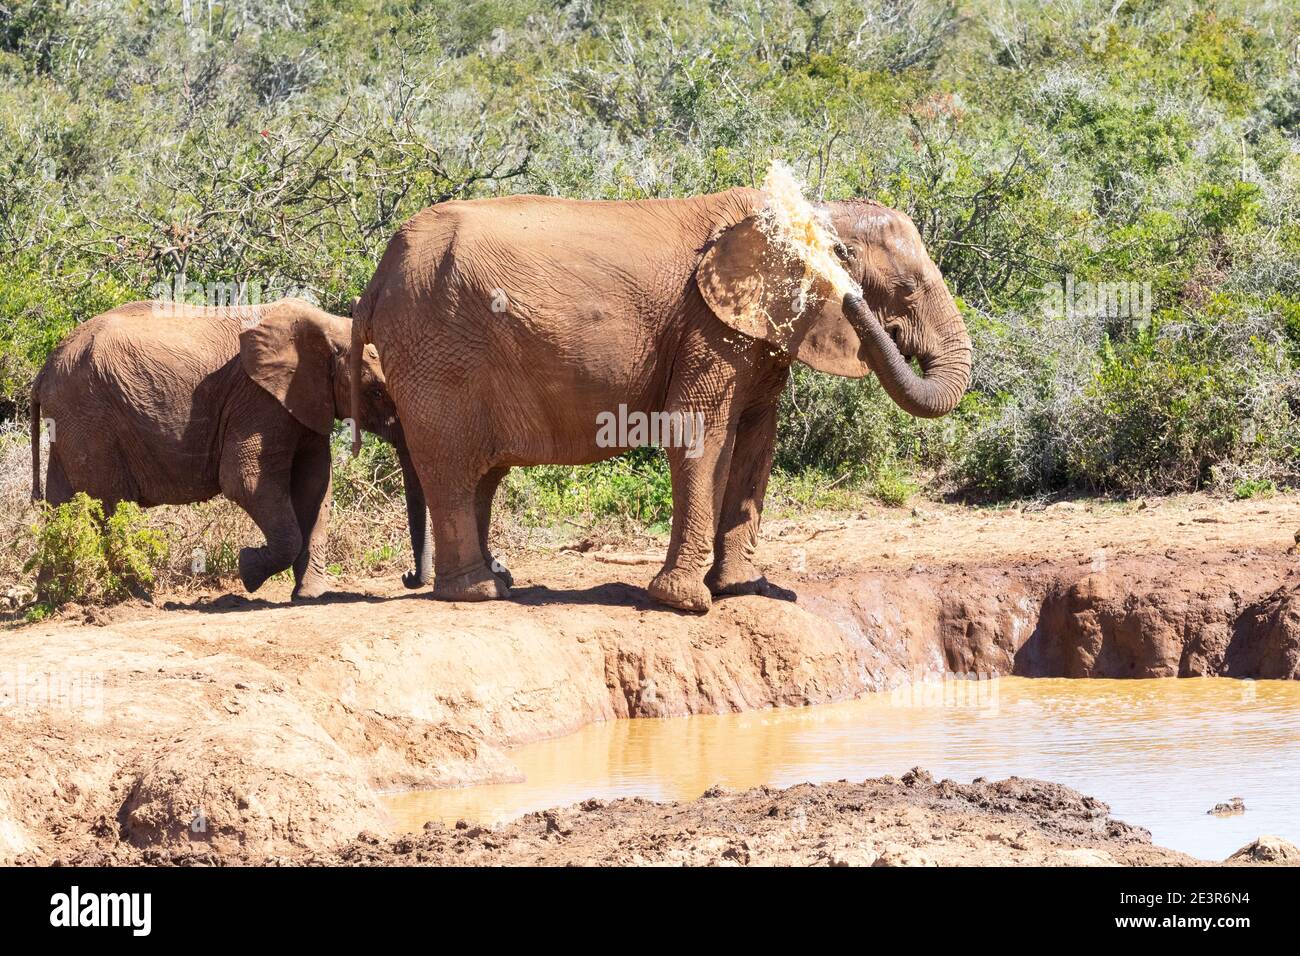 African Elephant (Loxodonta africana) cooling off at a waterhole splashing water, Addo Elephant National Park, Eastern Cape, South Africa Stock Photo